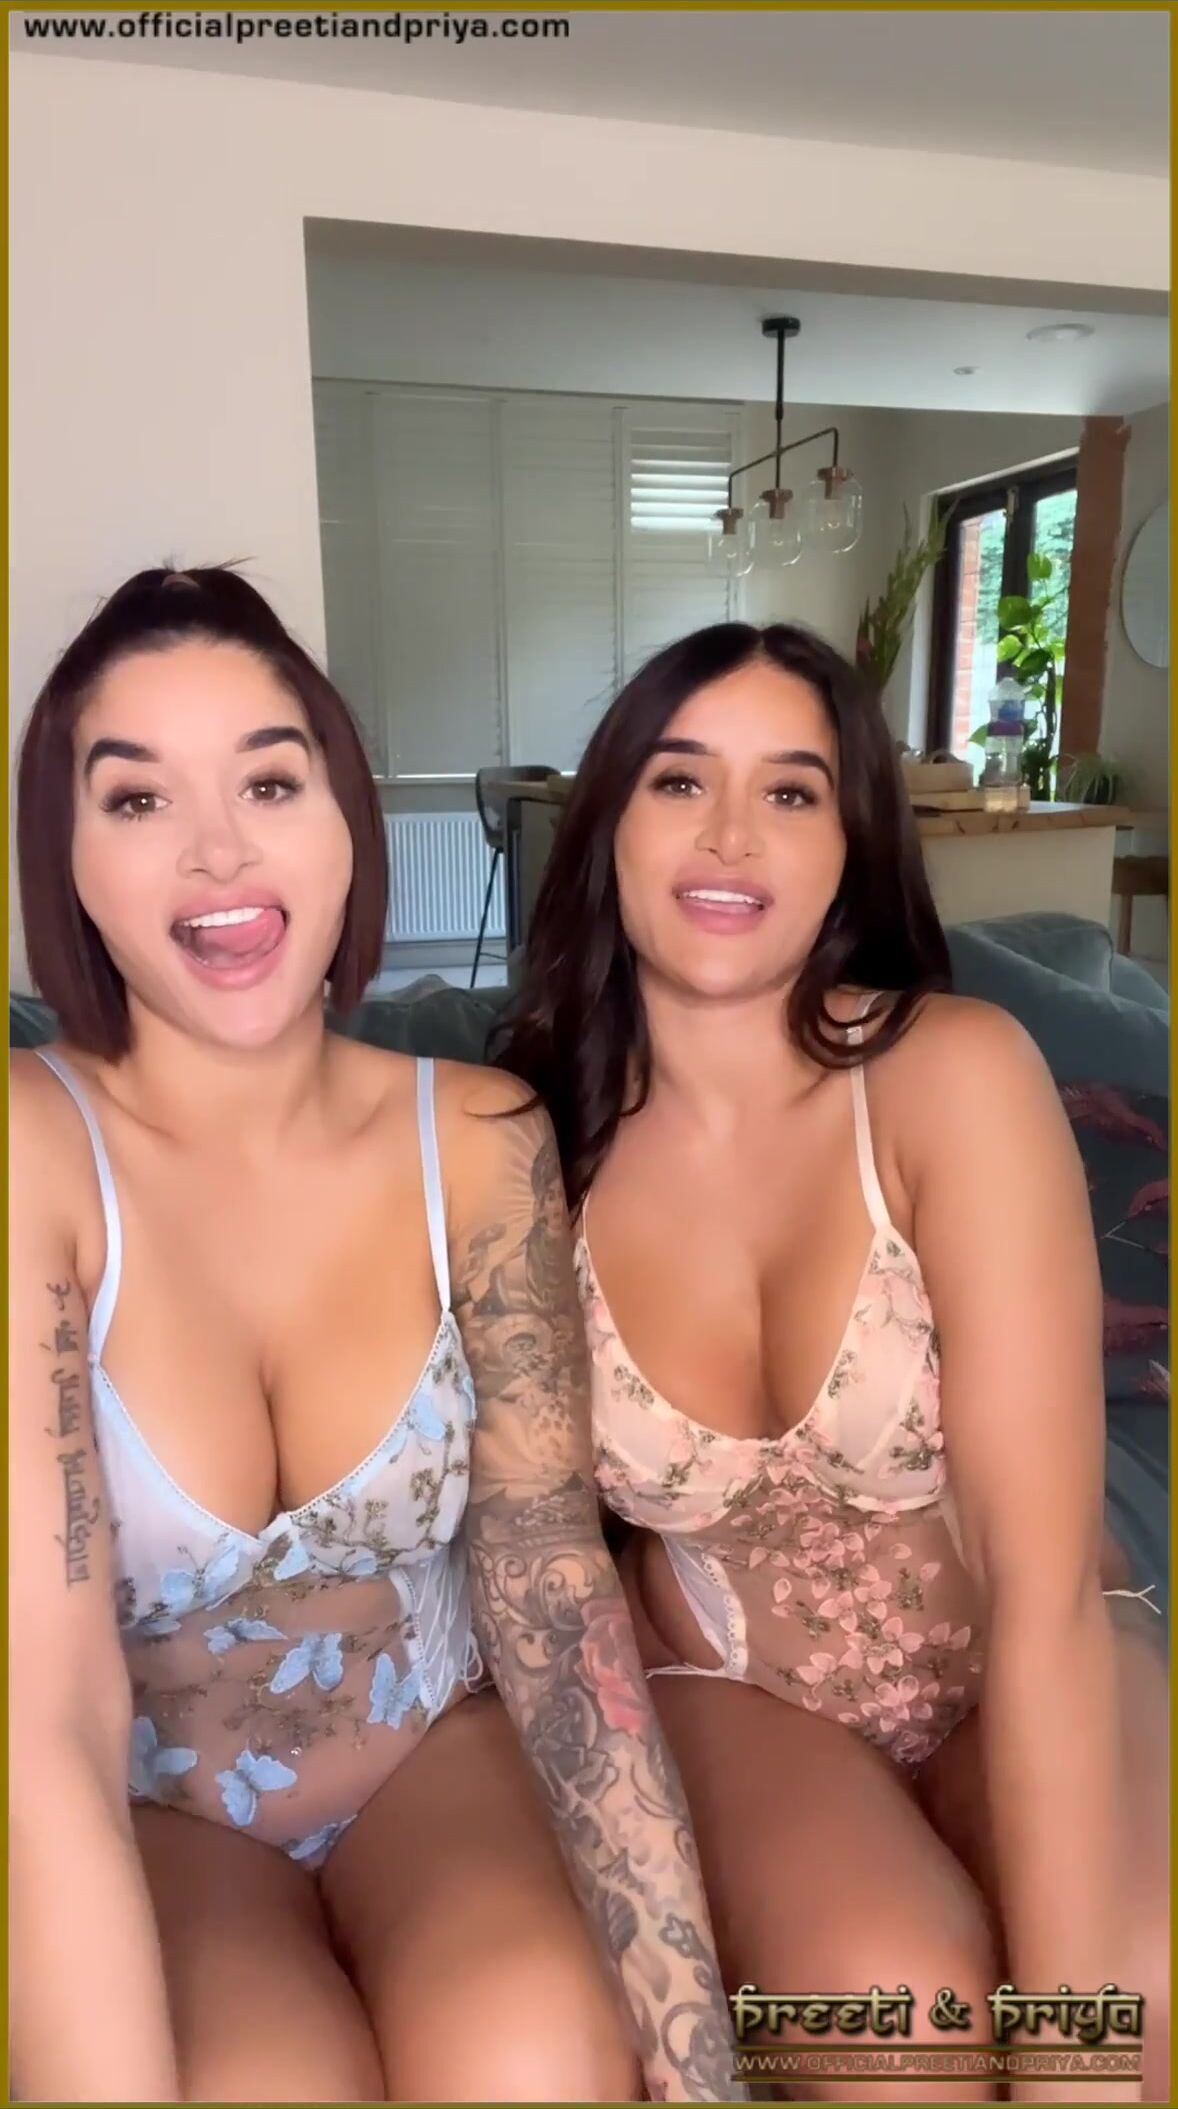 Preeti And Priya Horny Twin Sisters Playing With Tits In Lingerie Video -  ViralPornhub.com